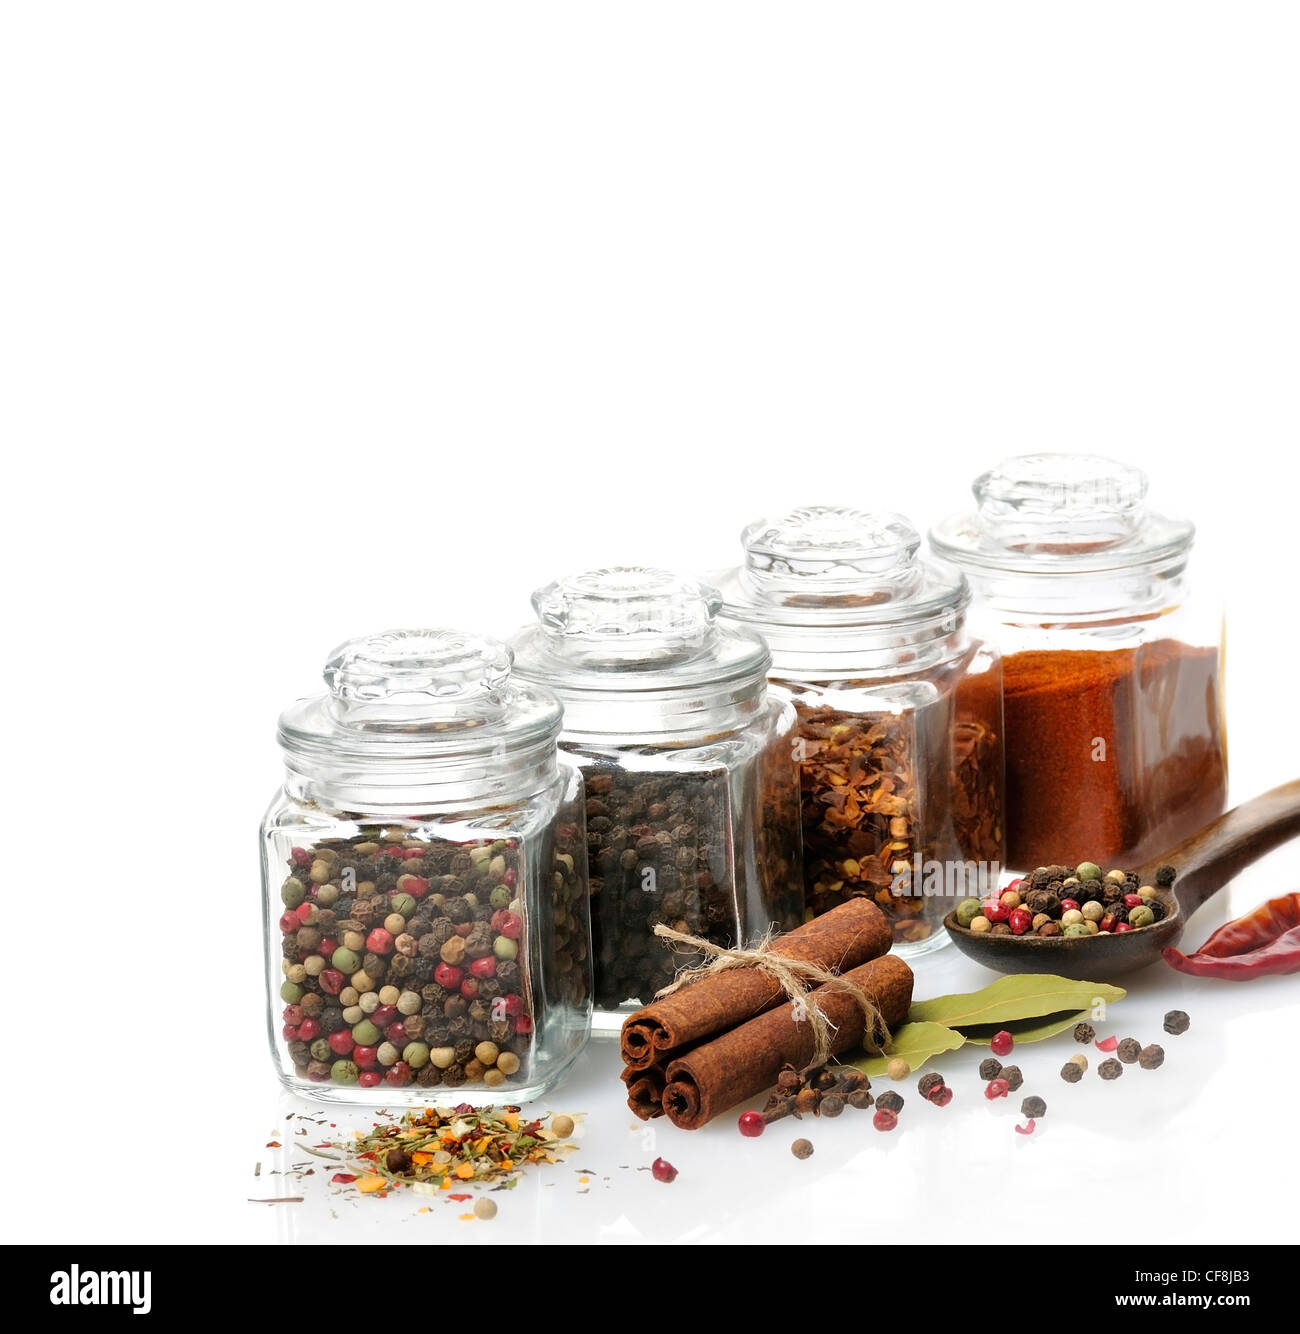 Premium Photo  Spices in glass jars on a pink background